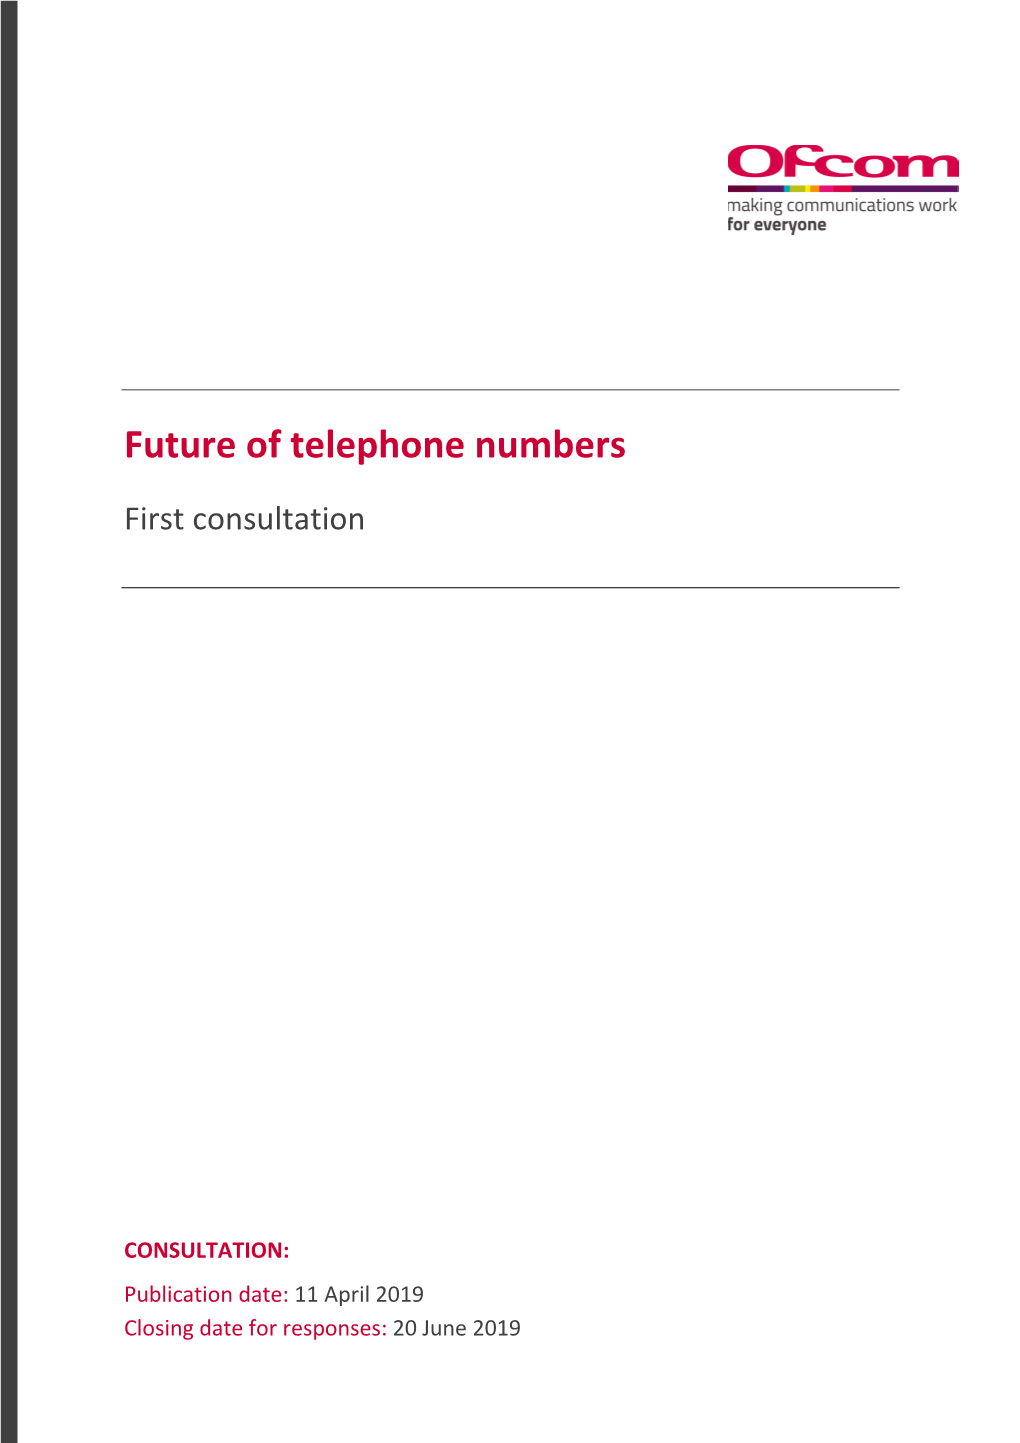 Future of Telephone Numbers: First Consultation